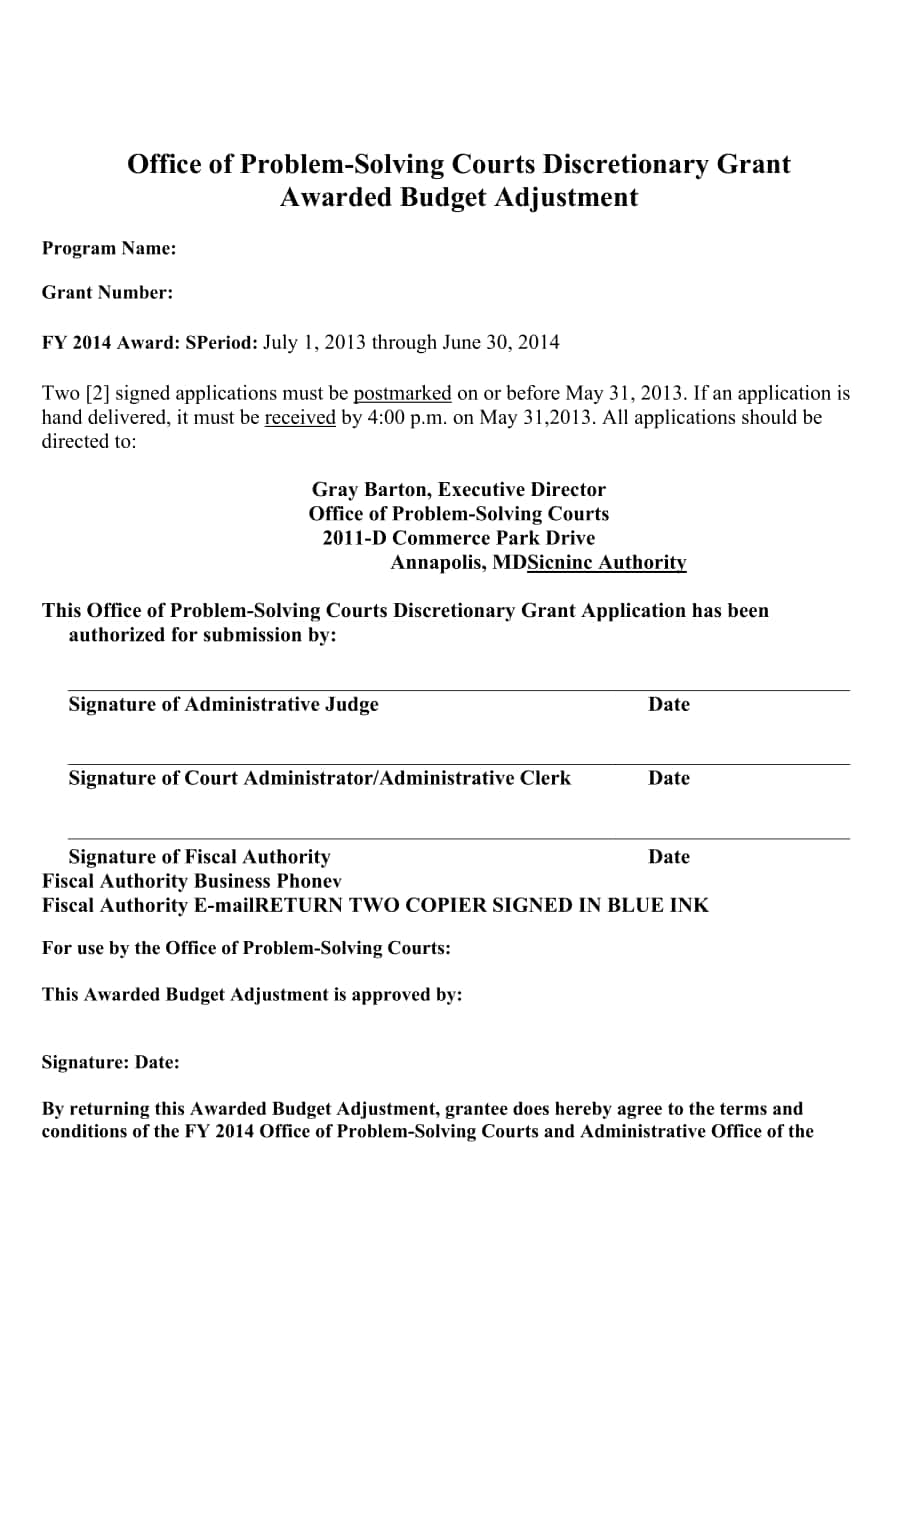 Mental Health Court Grant Application Cover Sheet.docx_第1页